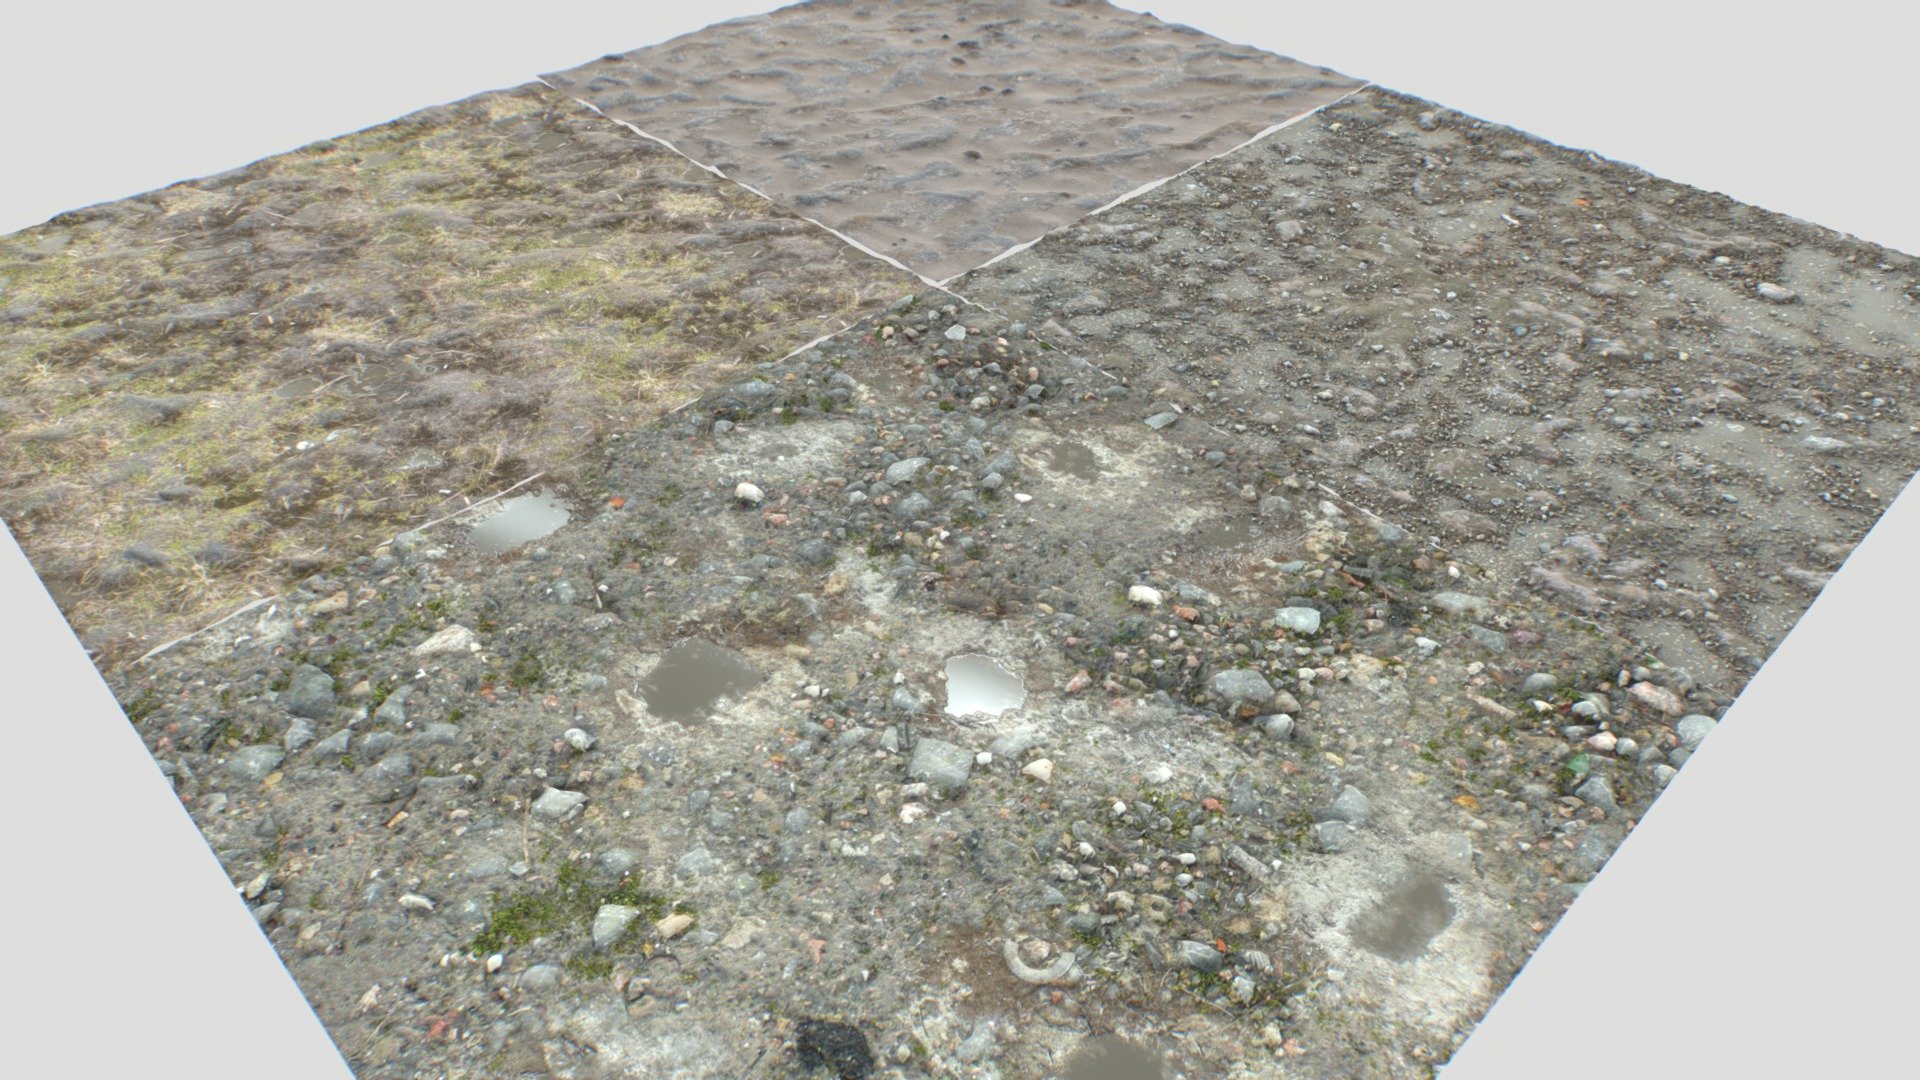 096x4096px size with Albedo, Normal, Displacement, Roughness, Metalness, AO. PNG seamless textures.

Textures consist in a mix of sand, soil, puddles, rocks and mud terrain textures.

All ready for tessellation shaders.

Suitable for forests, construction sites, mountain, wasteland, beaches, caves, mines, etc&hellip; - Dirt Terrain PBR Pack 17 Textures - Buy Royalty Free 3D model by 32cm 3d model